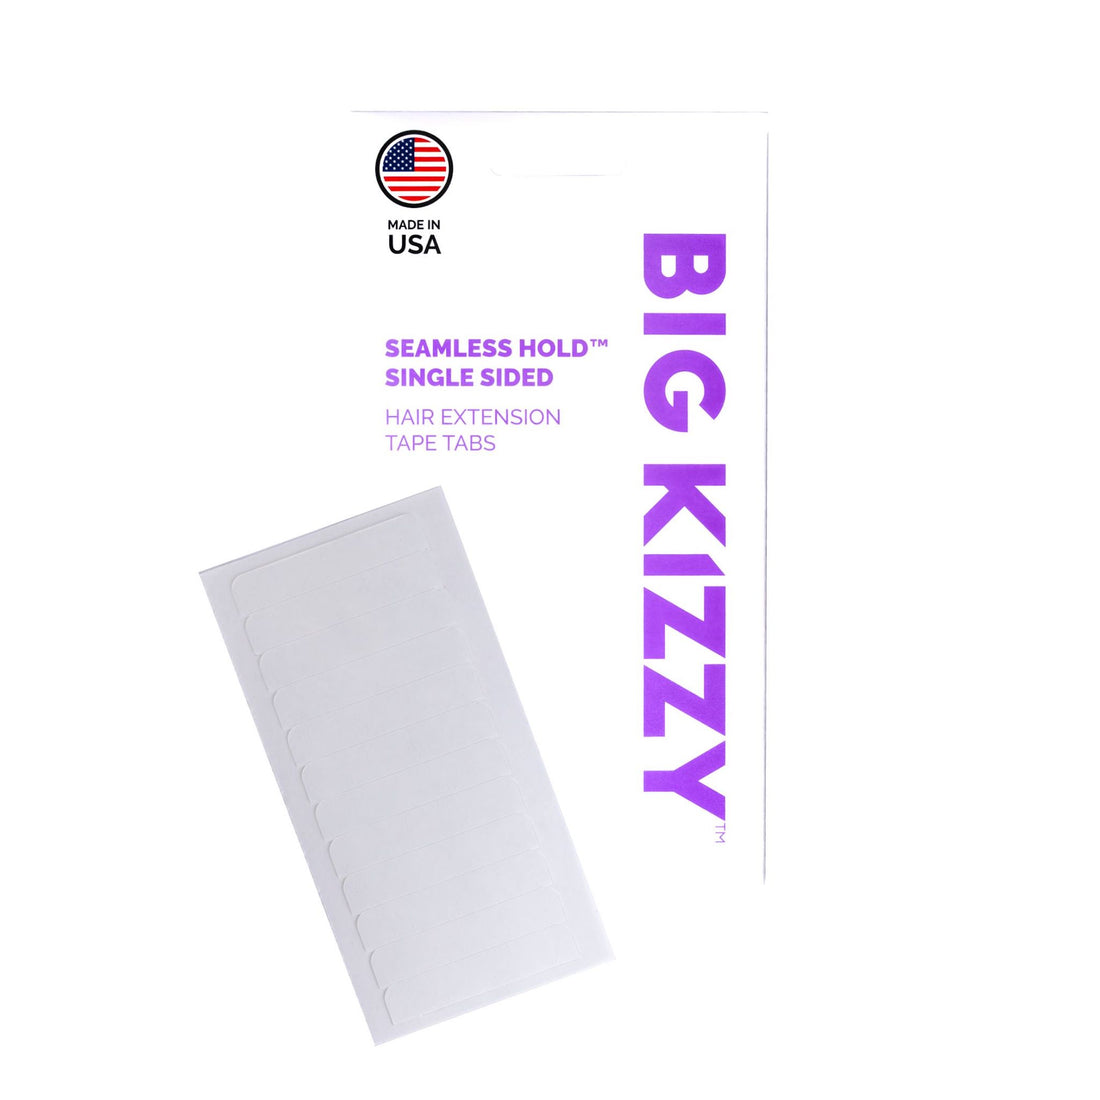 Big Kizzy® Seamless Hold Single Sided Hair Extension Replacement Tape Tabs Packaging with a single sheet of white single sided tape tabs overlayed on top of it